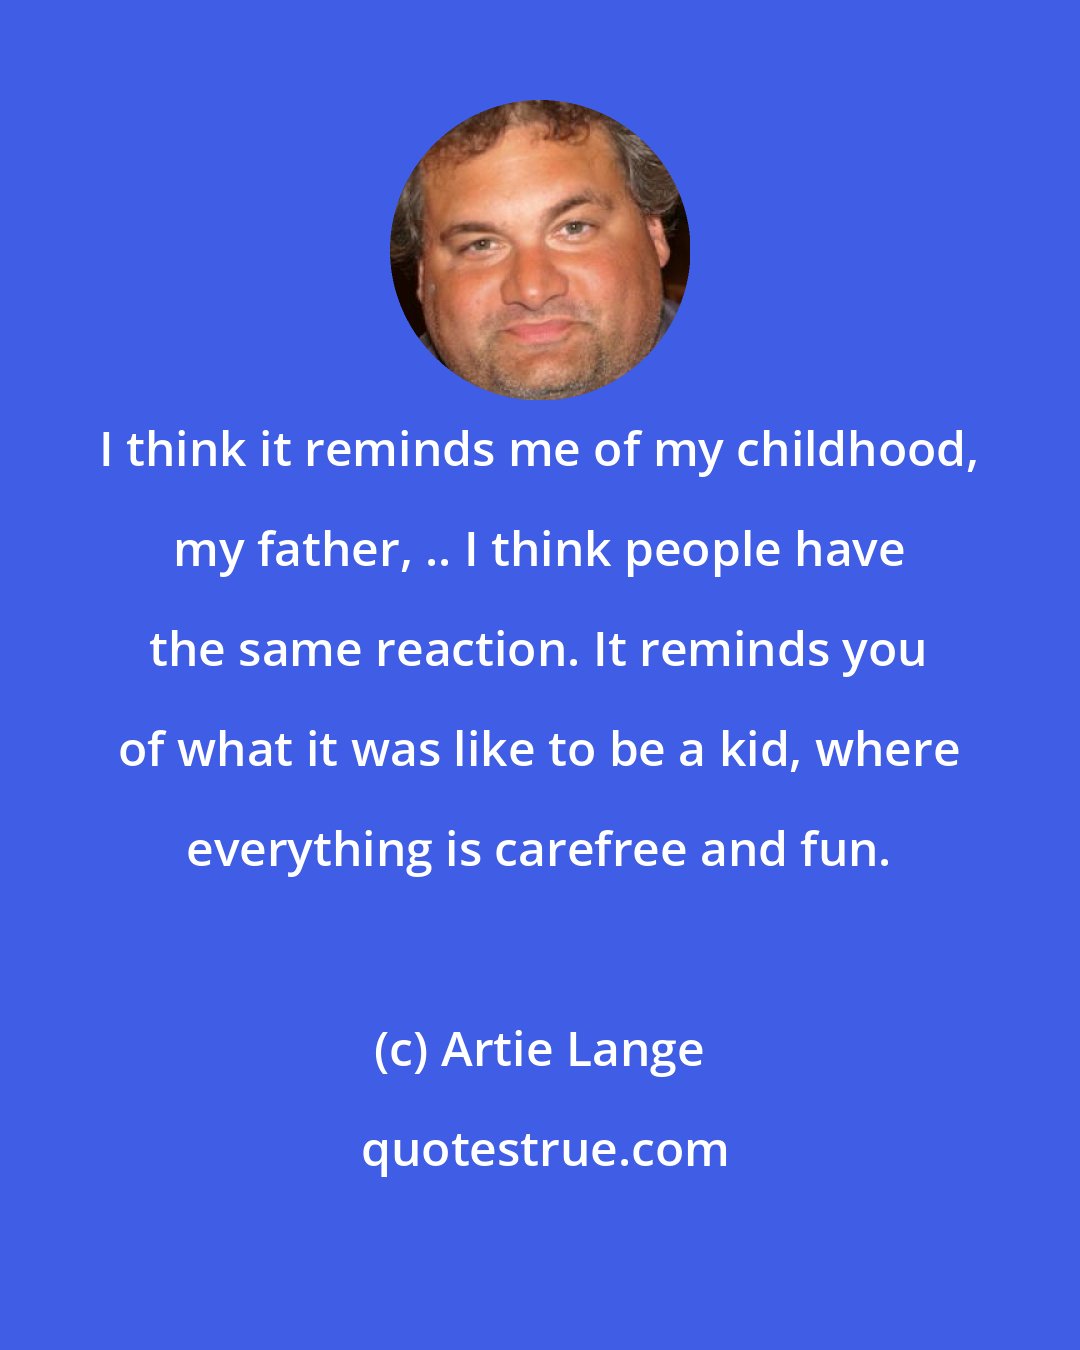 Artie Lange: I think it reminds me of my childhood, my father, .. I think people have the same reaction. It reminds you of what it was like to be a kid, where everything is carefree and fun.